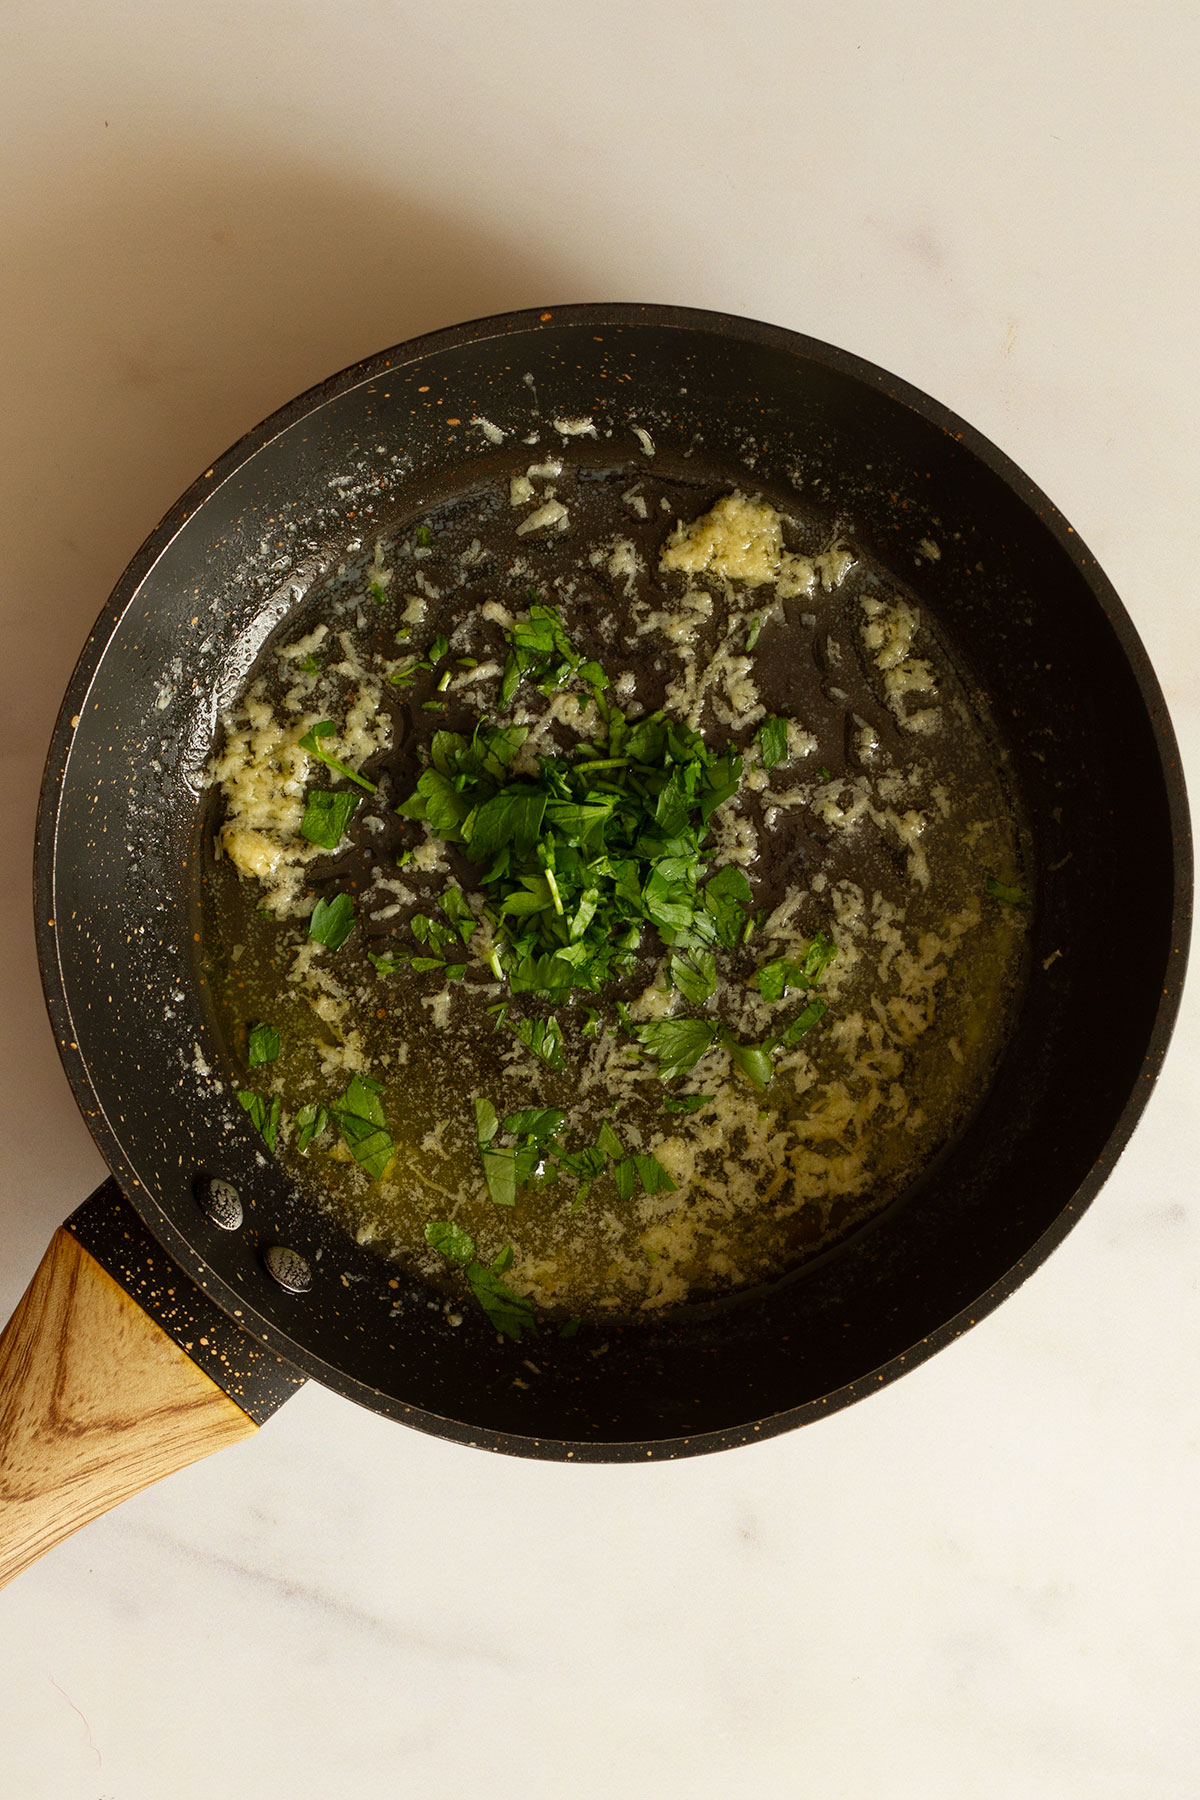 Preparing the melted butter and garlic sauce with added parsley in a dark coloured saucepan.